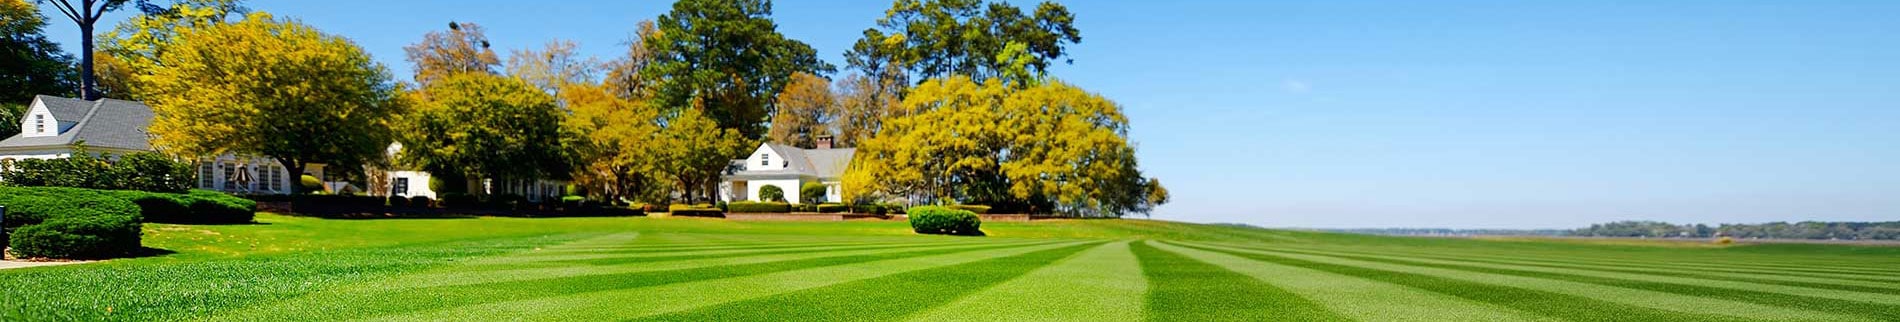 Lawn Care in Worcester, MA